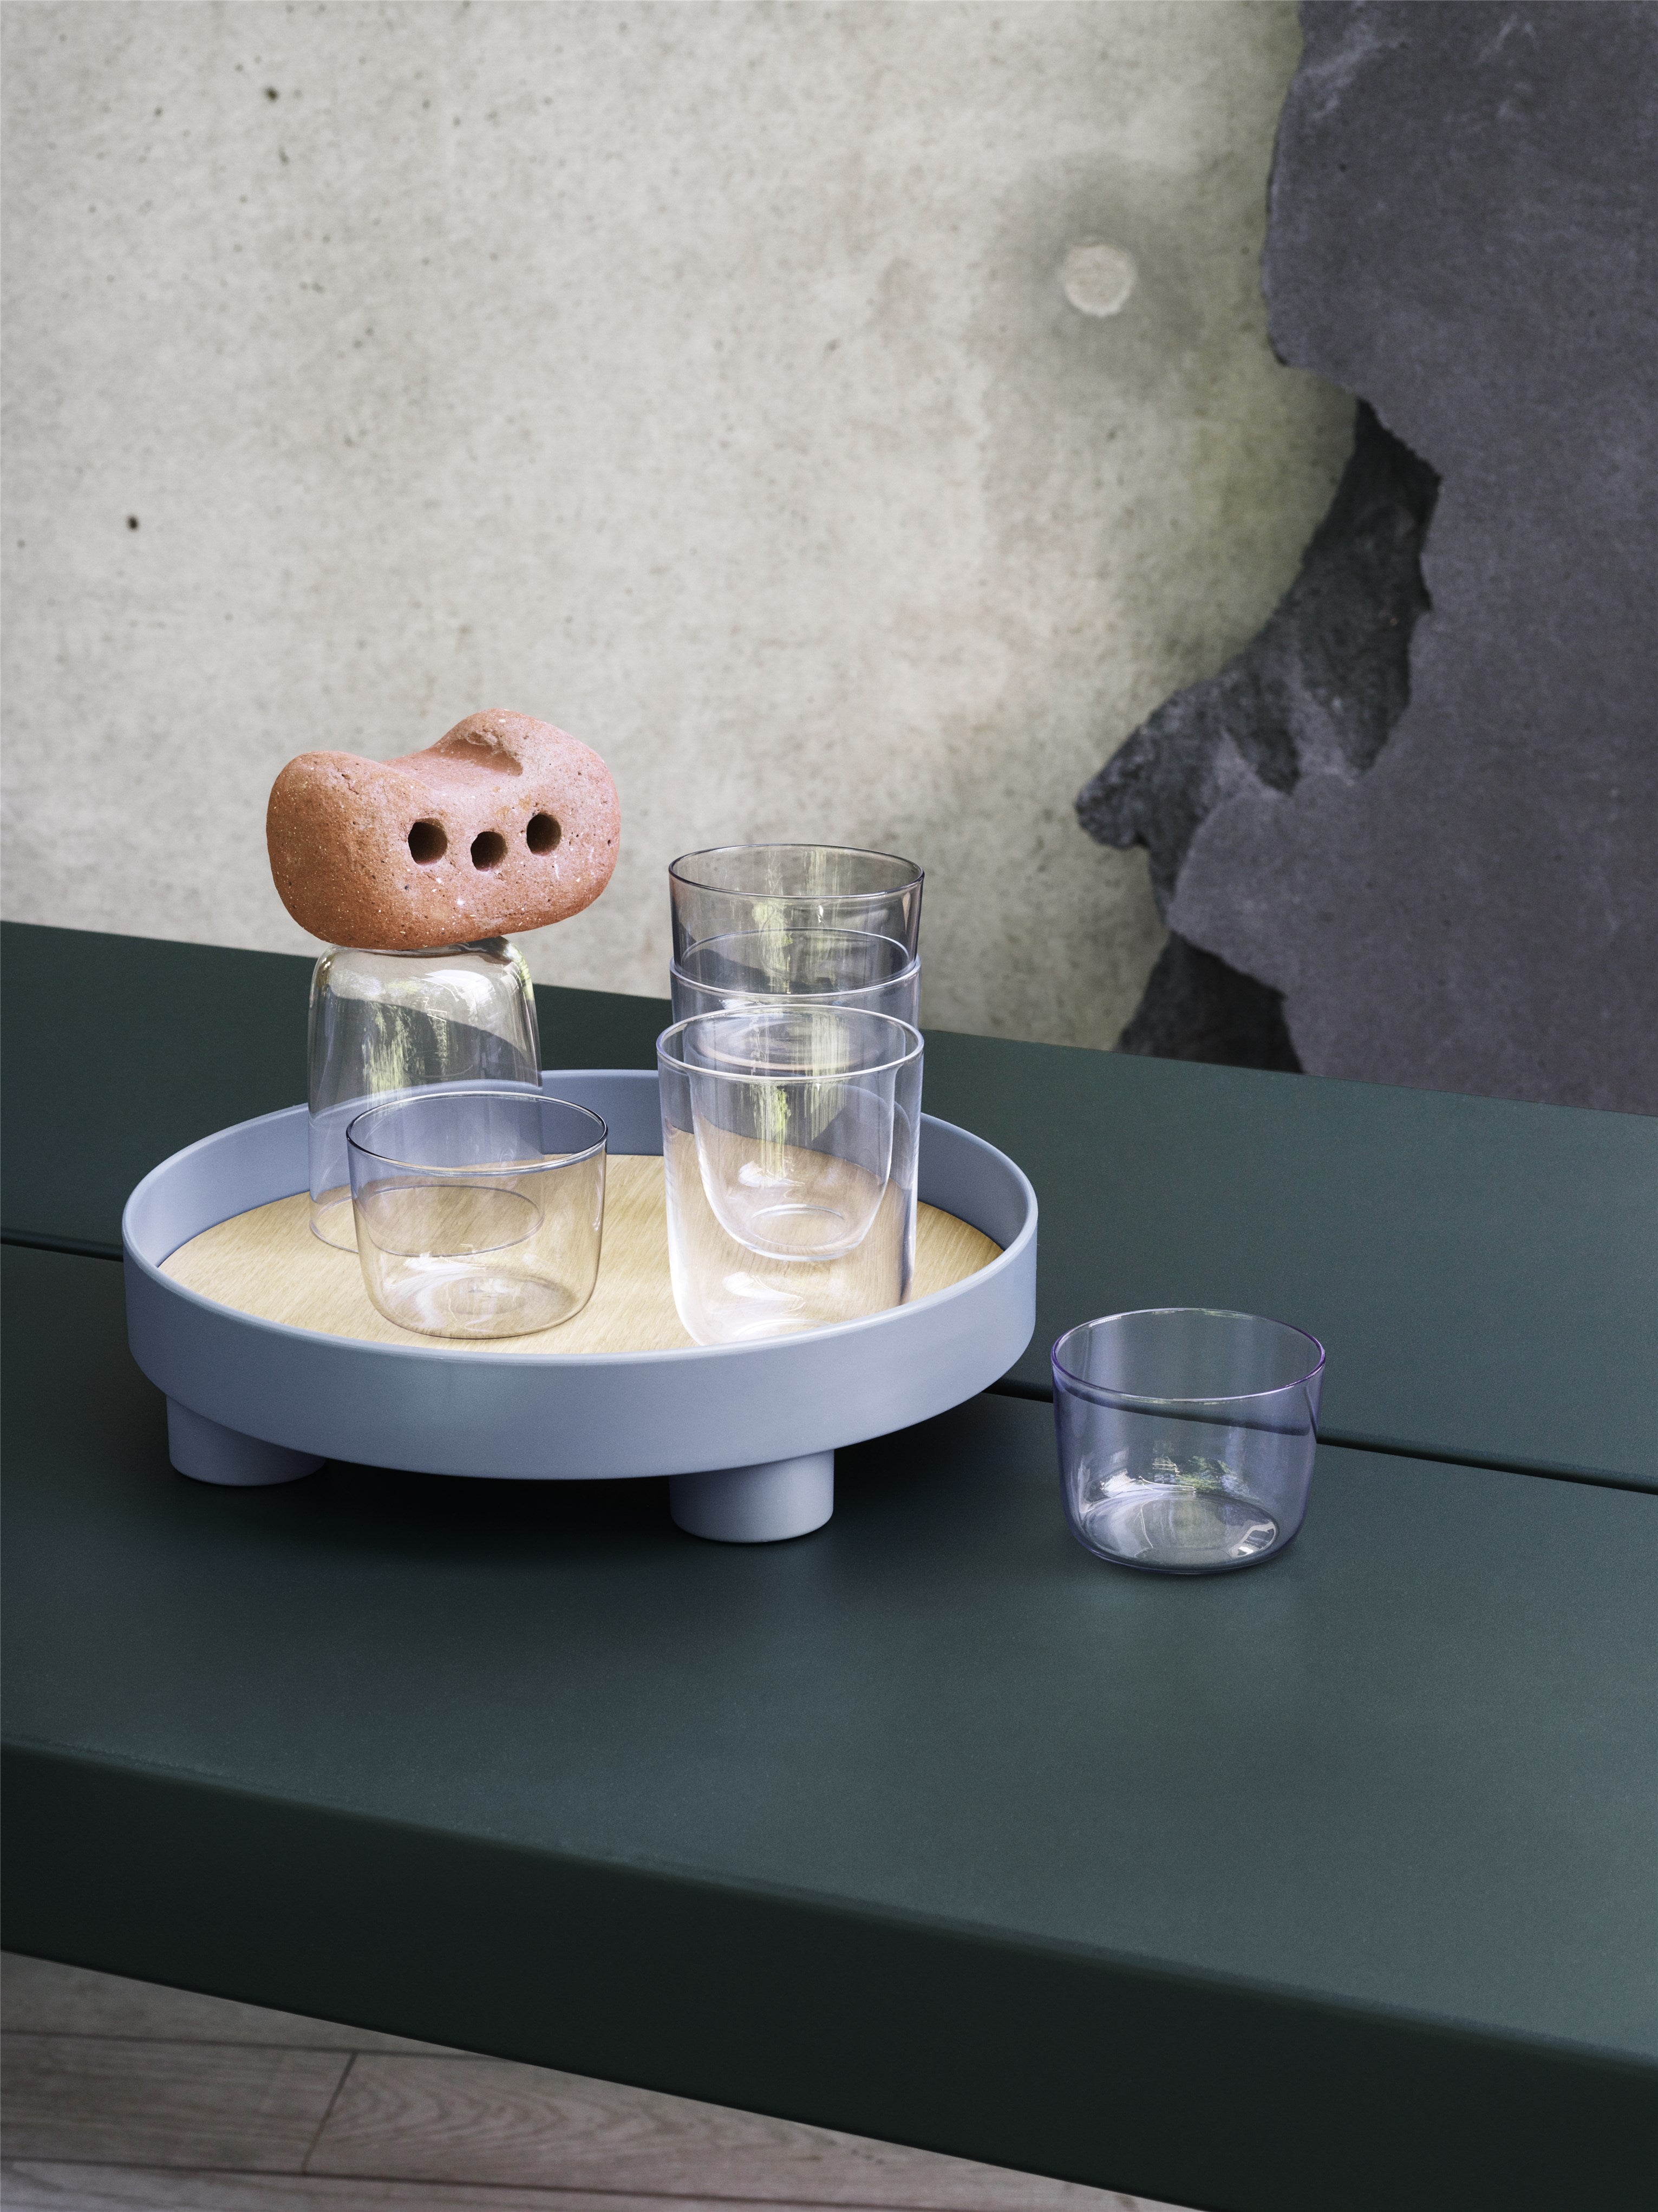 The Platform Tray by Sam Hekt and Kim Colin for Muuto fuses the function of Scandinavian design with Japanese artistry to form a stackable tray with a multitude of uses.